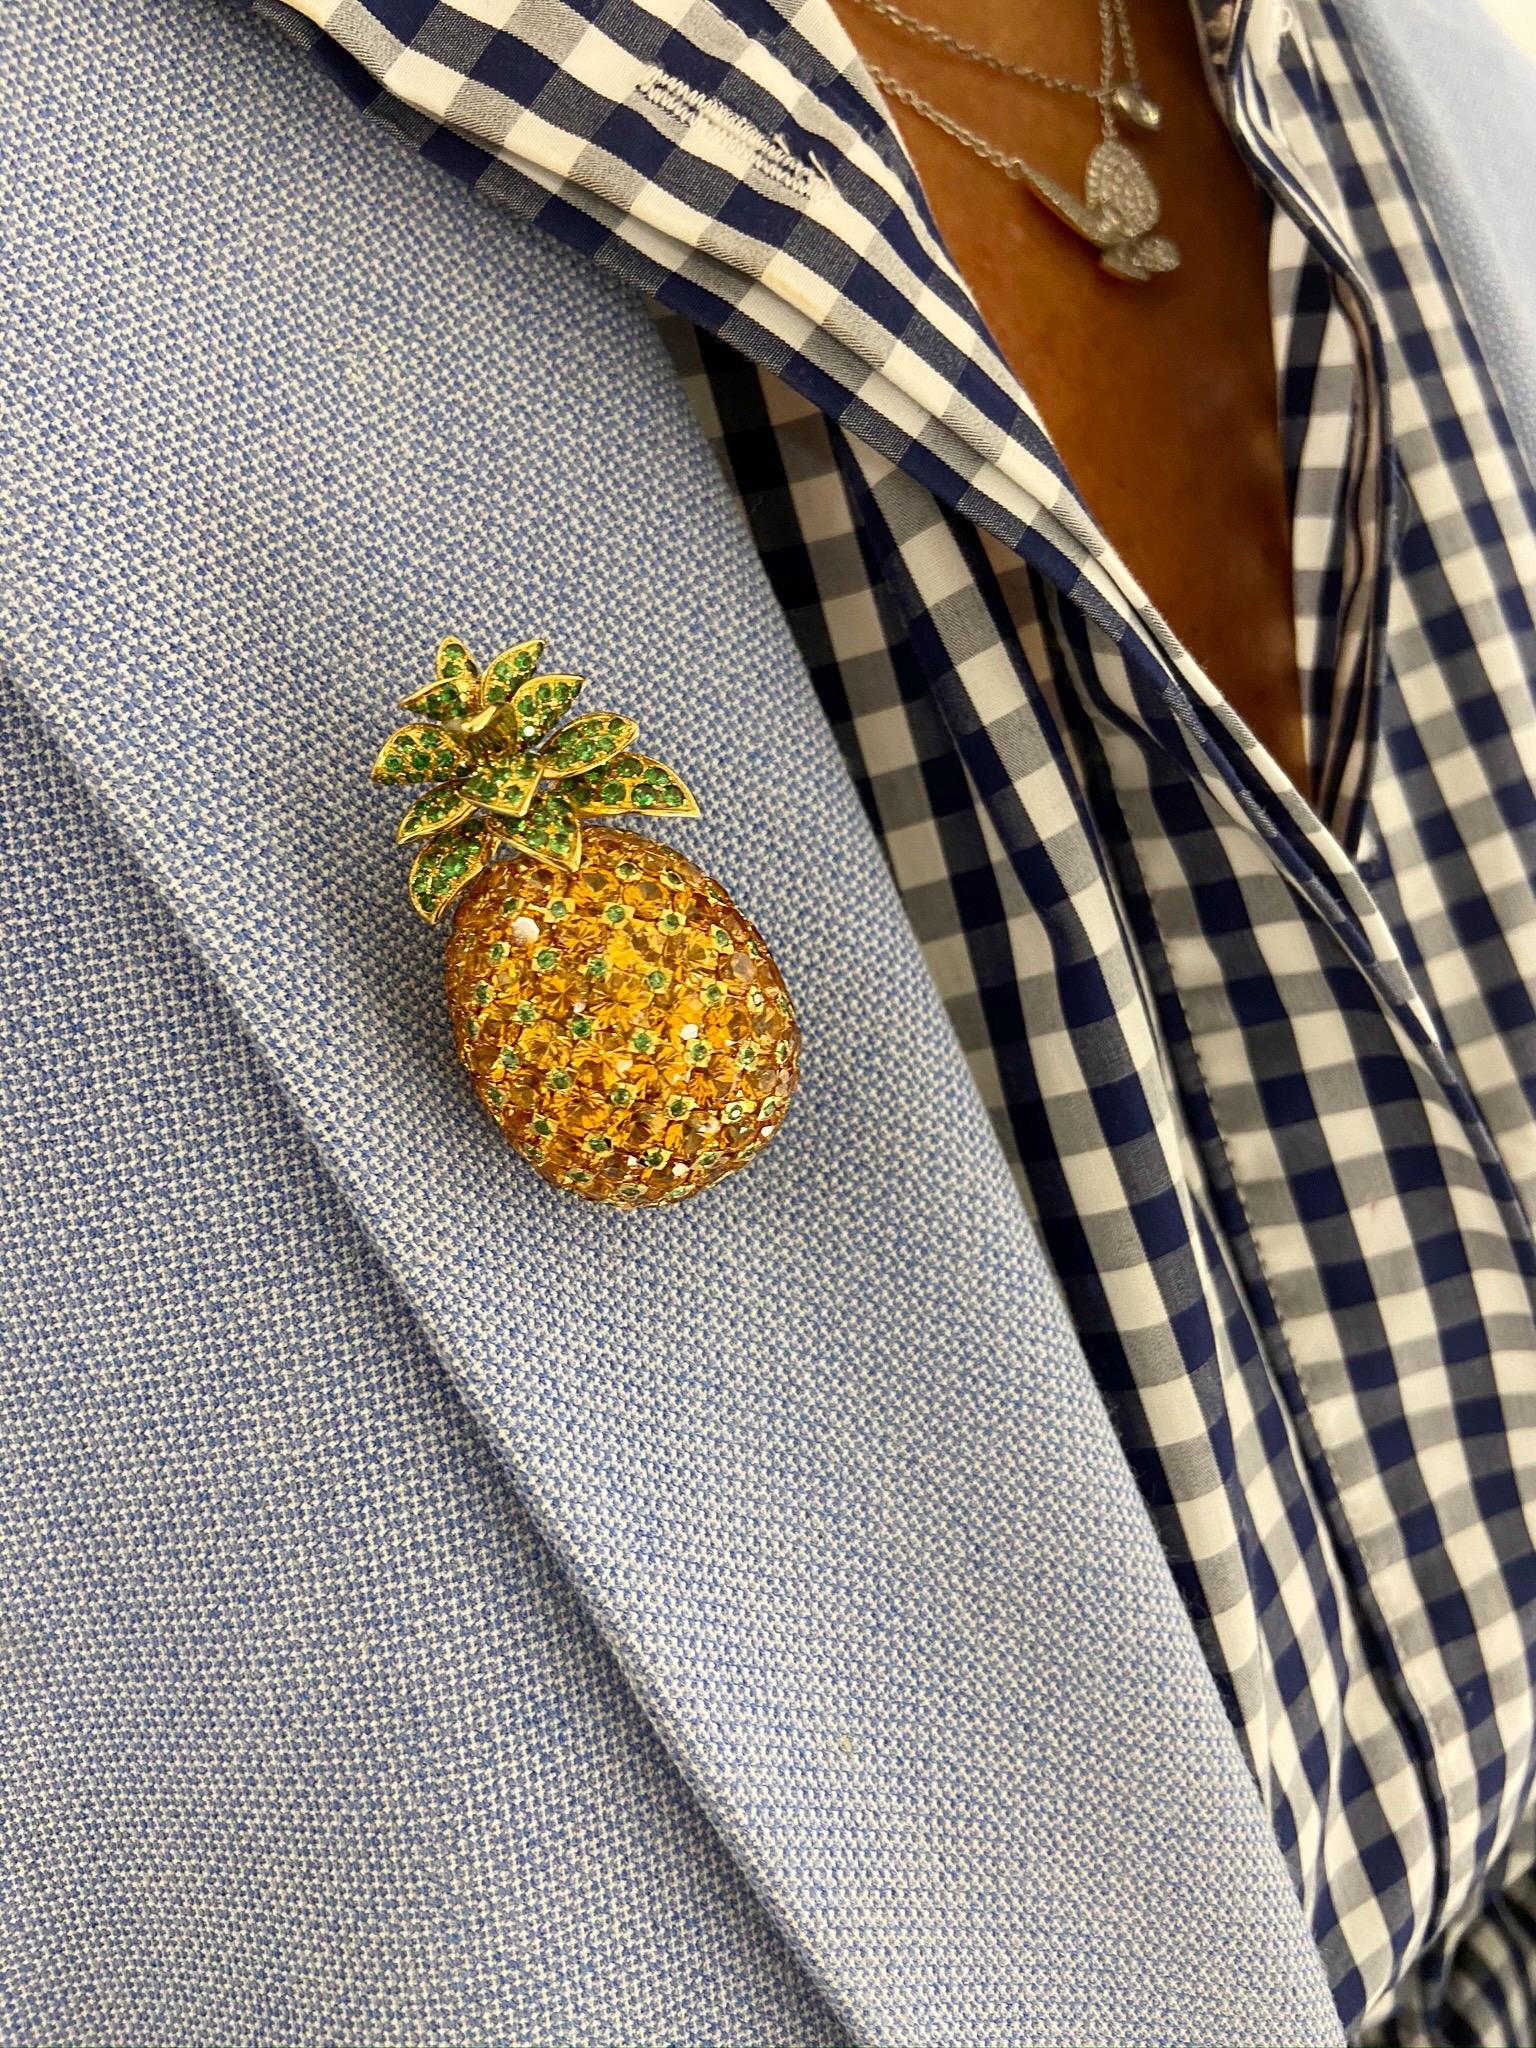 Cellini 18KT YG Pineapple Brooch with 21.75 Carat Orange Garnets and Tsavorites In New Condition For Sale In New York, NY